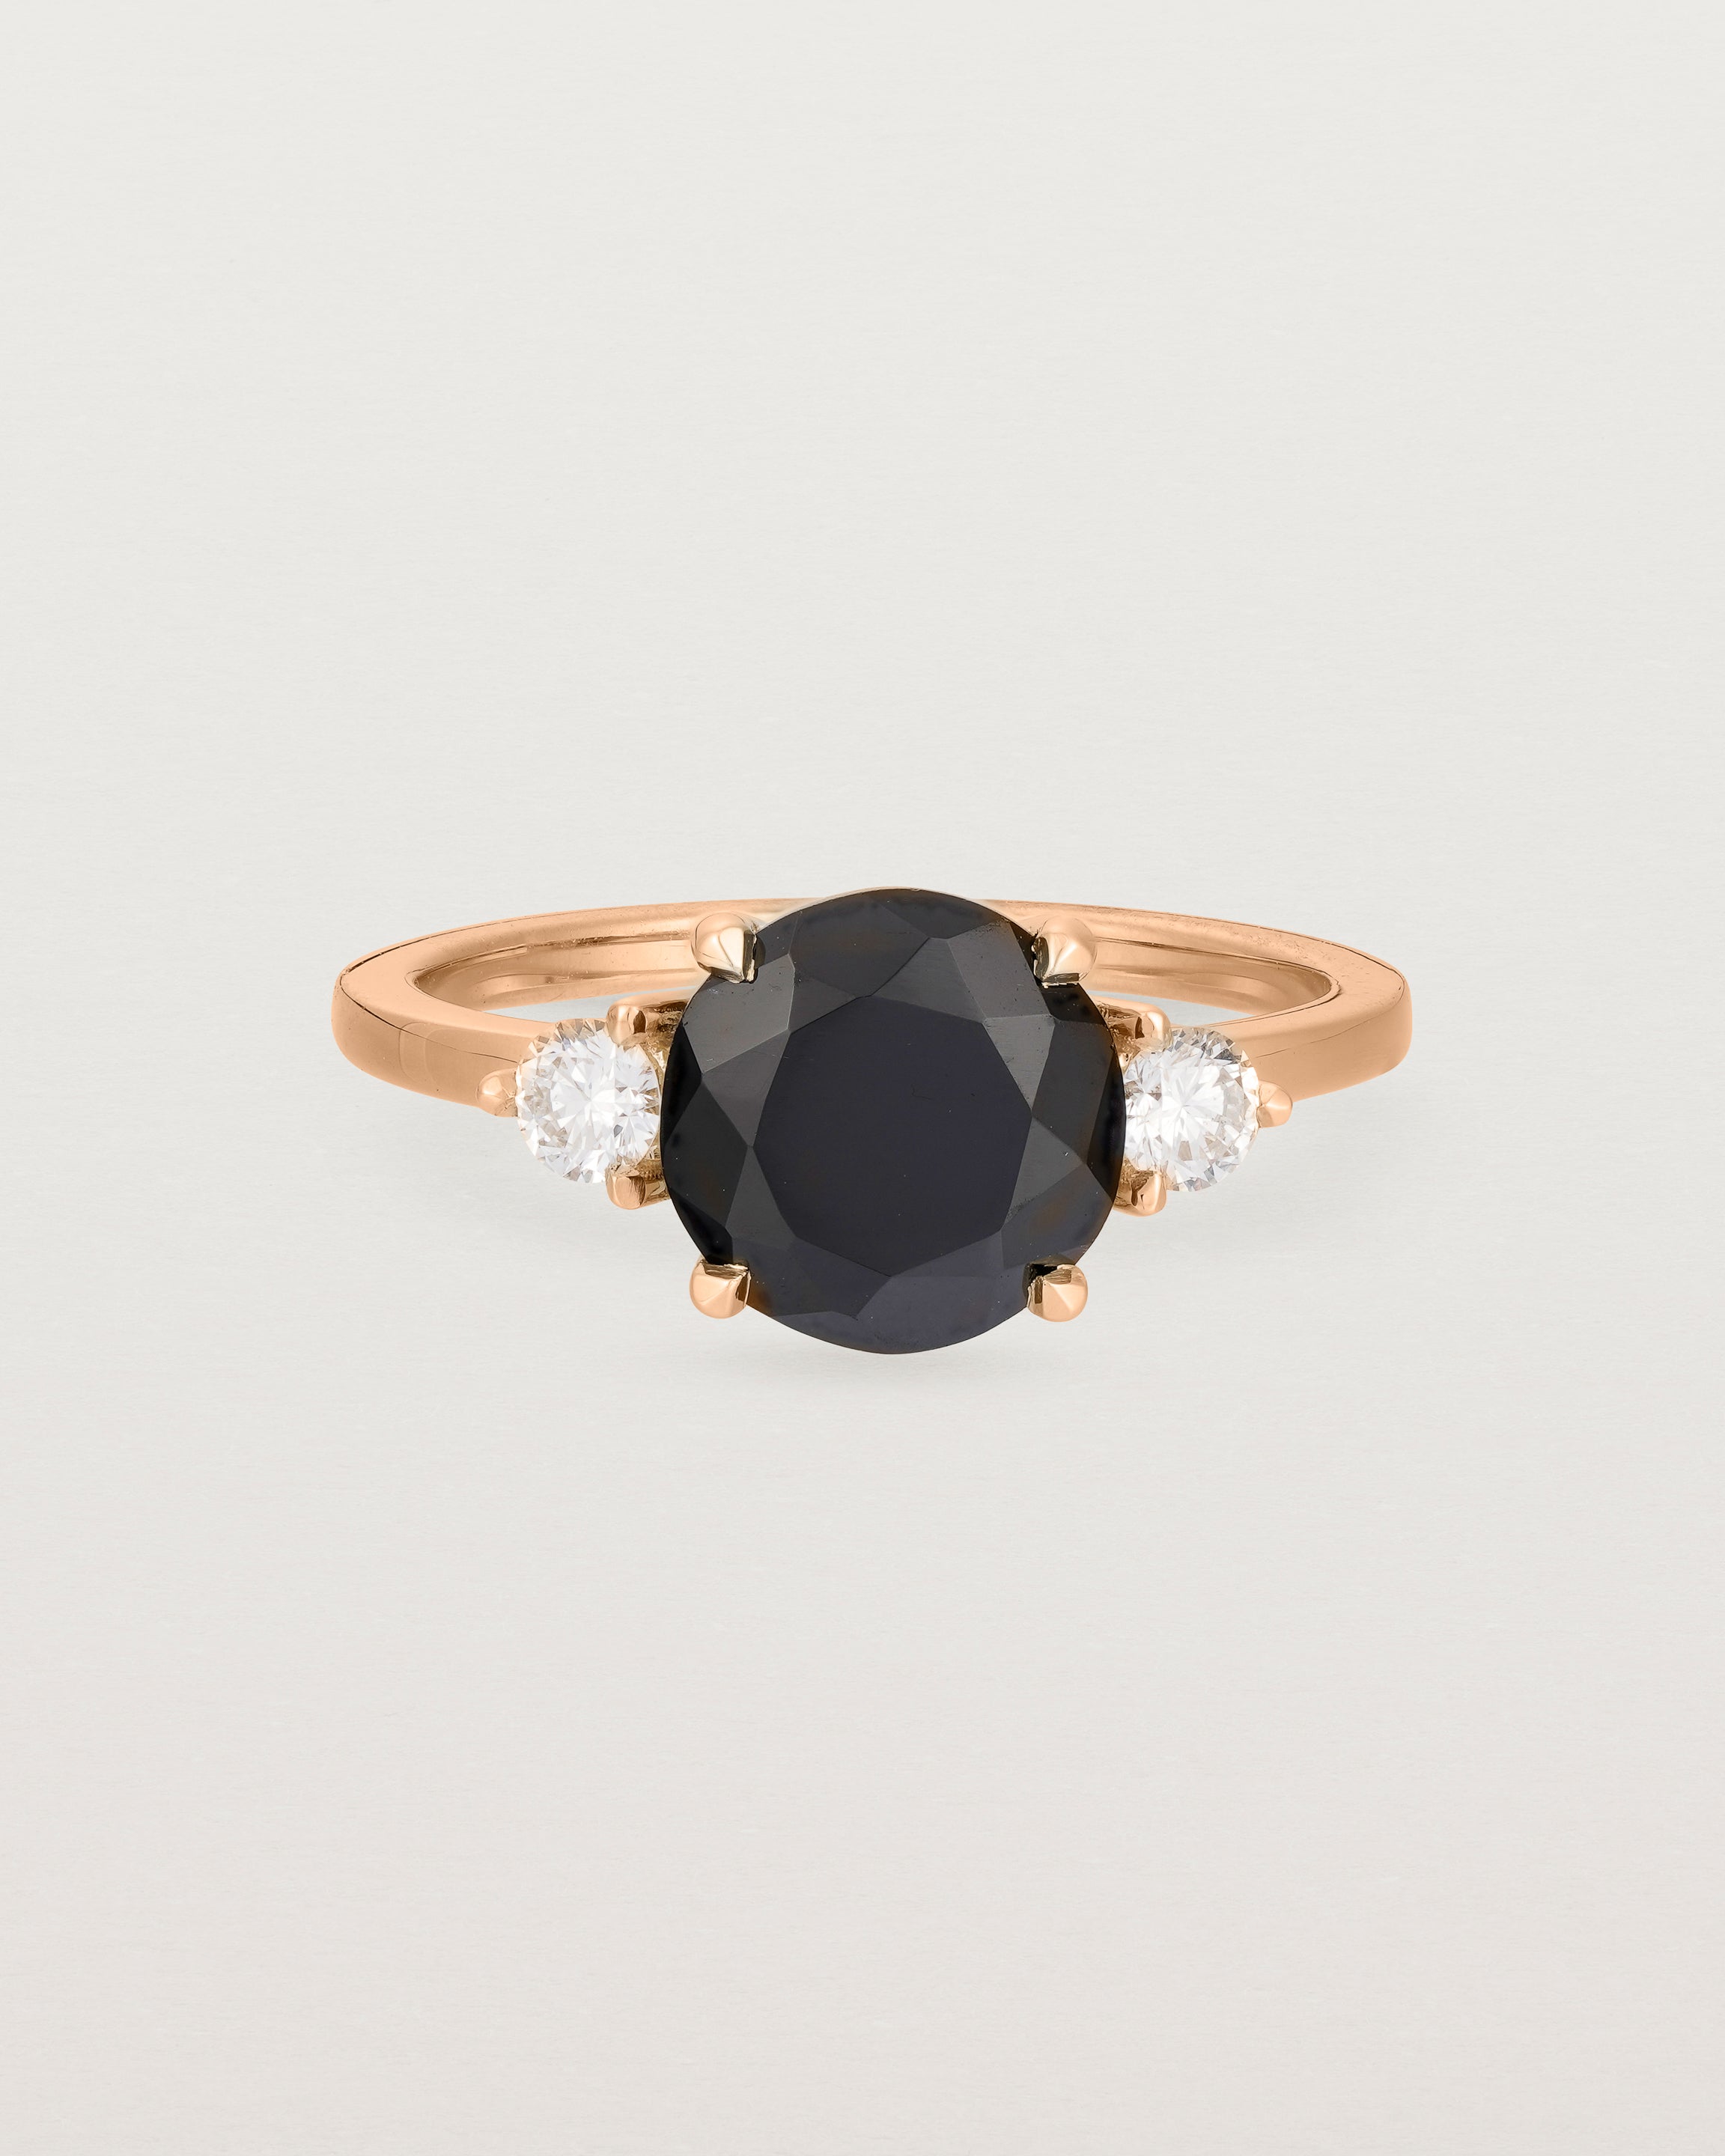 Front view of the Una Round Trio Ring | Black Spinel & Diamonds | Rose Gold.